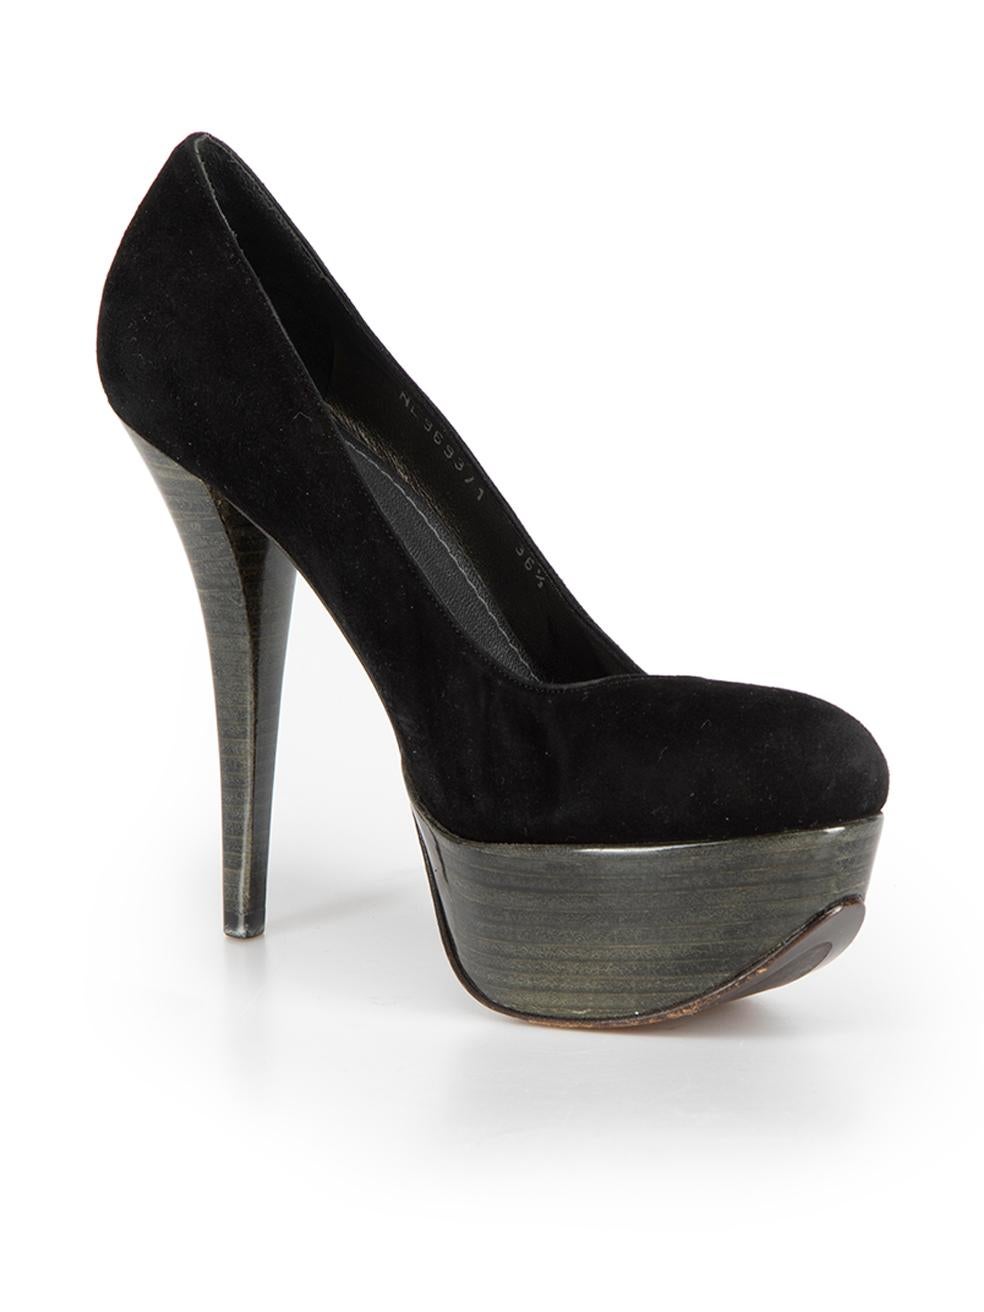 CONDITION is Very good. Minimal wear to shoes is evident. Minimal wear to the right shoe heel with scuffing on this used Stuart Weitzman designer resale item. 



Details


Black

Suede

Slip on heels

Round toe

Platform high heel





Made in